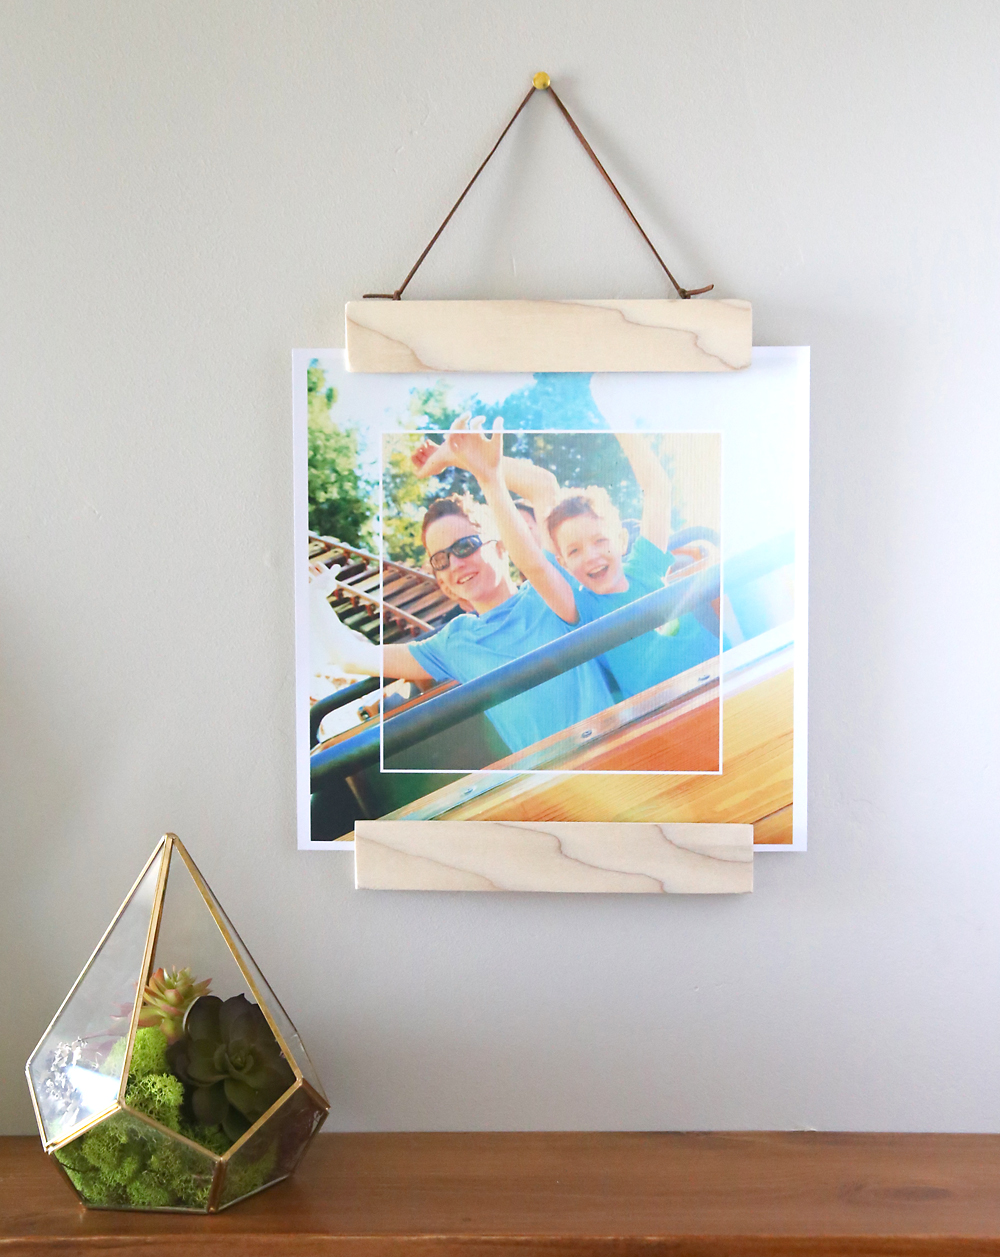 Learn how to make this DIY modern wood + magnet hanging photo frame - it's really easy to make and super easy to swap out photos! Also, learn how to add an effects collage to your photos with Photoshop Elements 15.